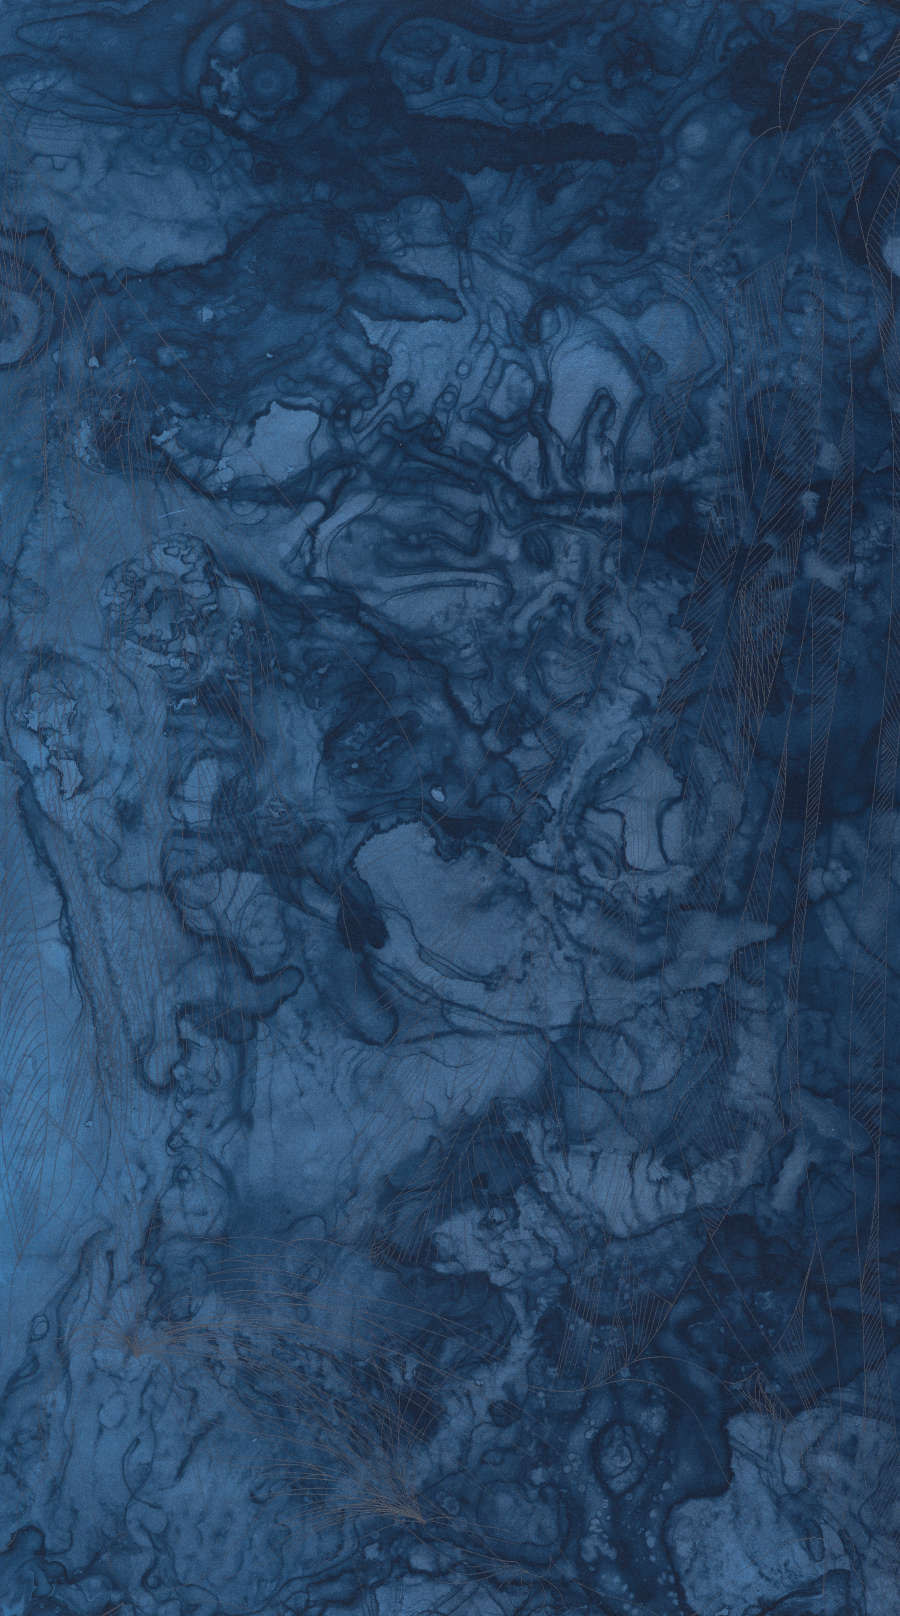 Dark, marble-like washes of ink fill the entirety of an indigo-dyed sheet of paper.